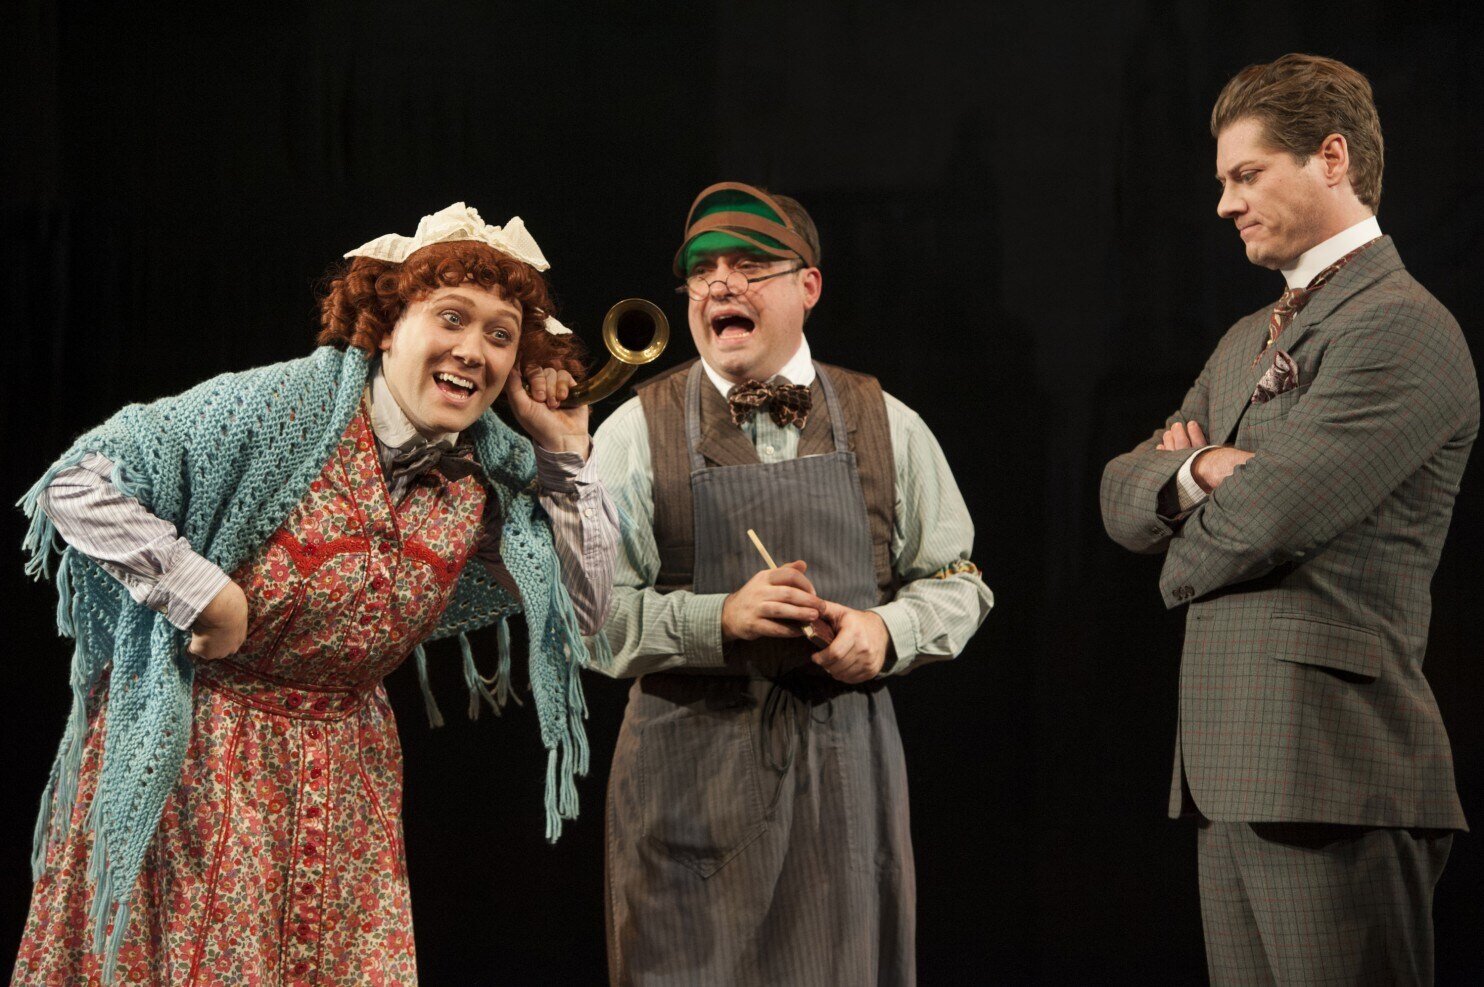  From left, Stanley Bahorek, Michael Glenn and Gregory Wooddell as Sherlock Holmes in Ken Ludwig’s “Baskerville: A Sherlock Holmes Mystery” at Arena Stage. (Margot Schulman) 